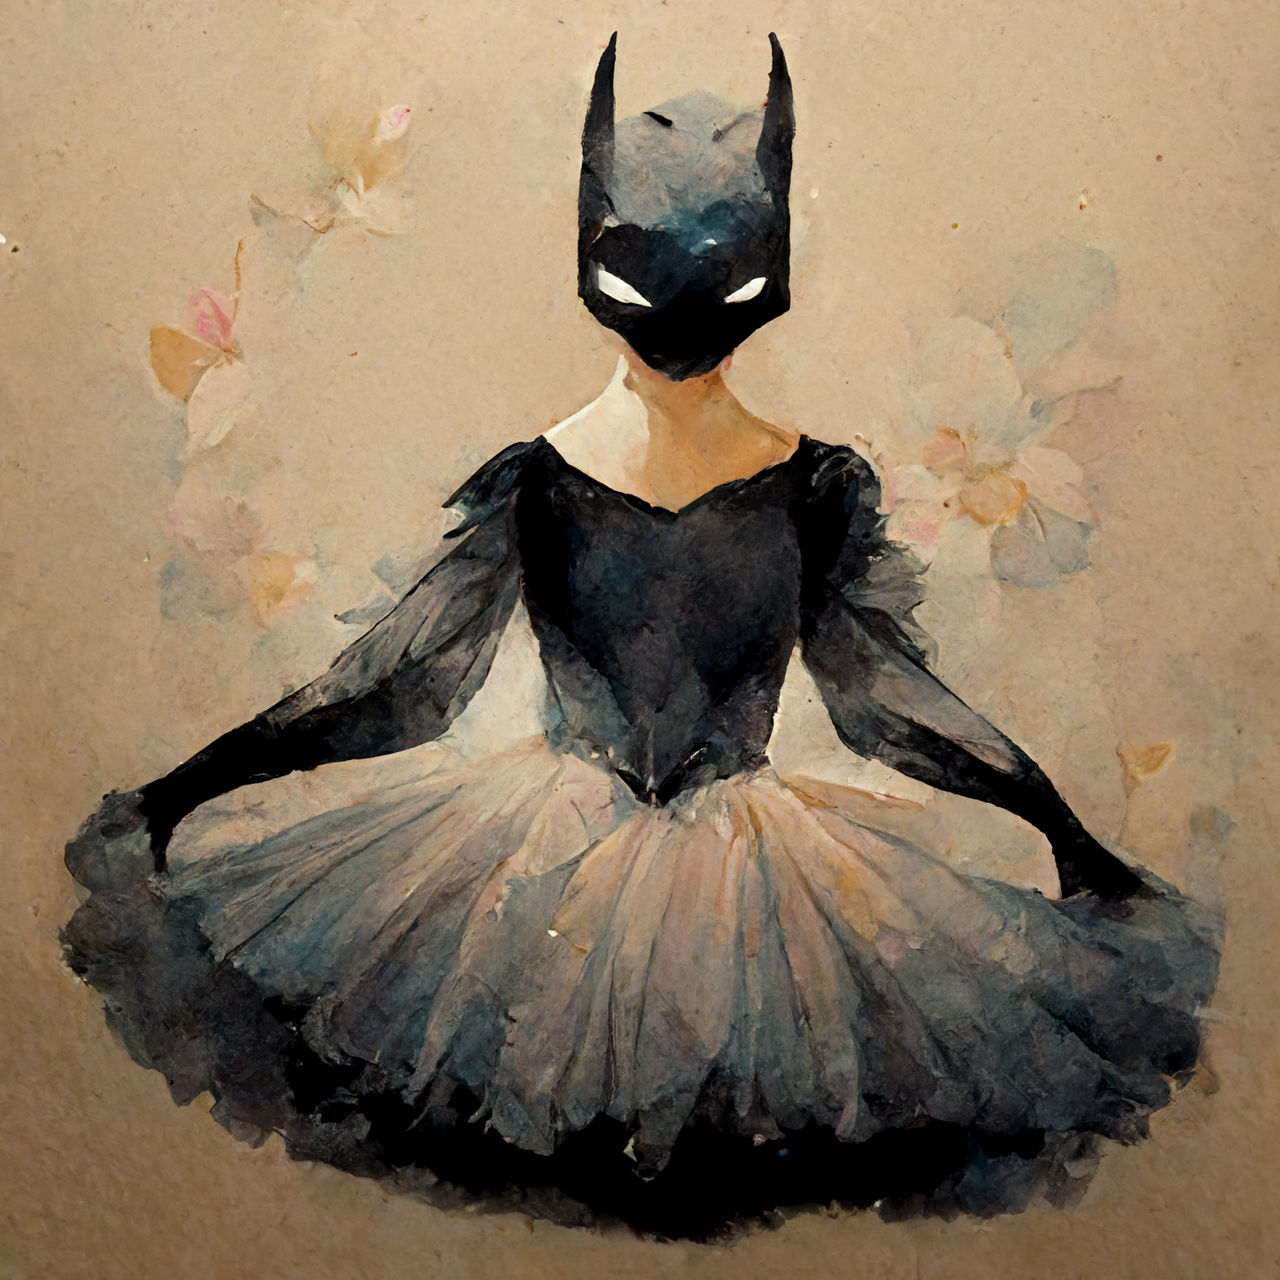 Batman As A Ballerina by in-the-mind-of-ai on DeviantArt